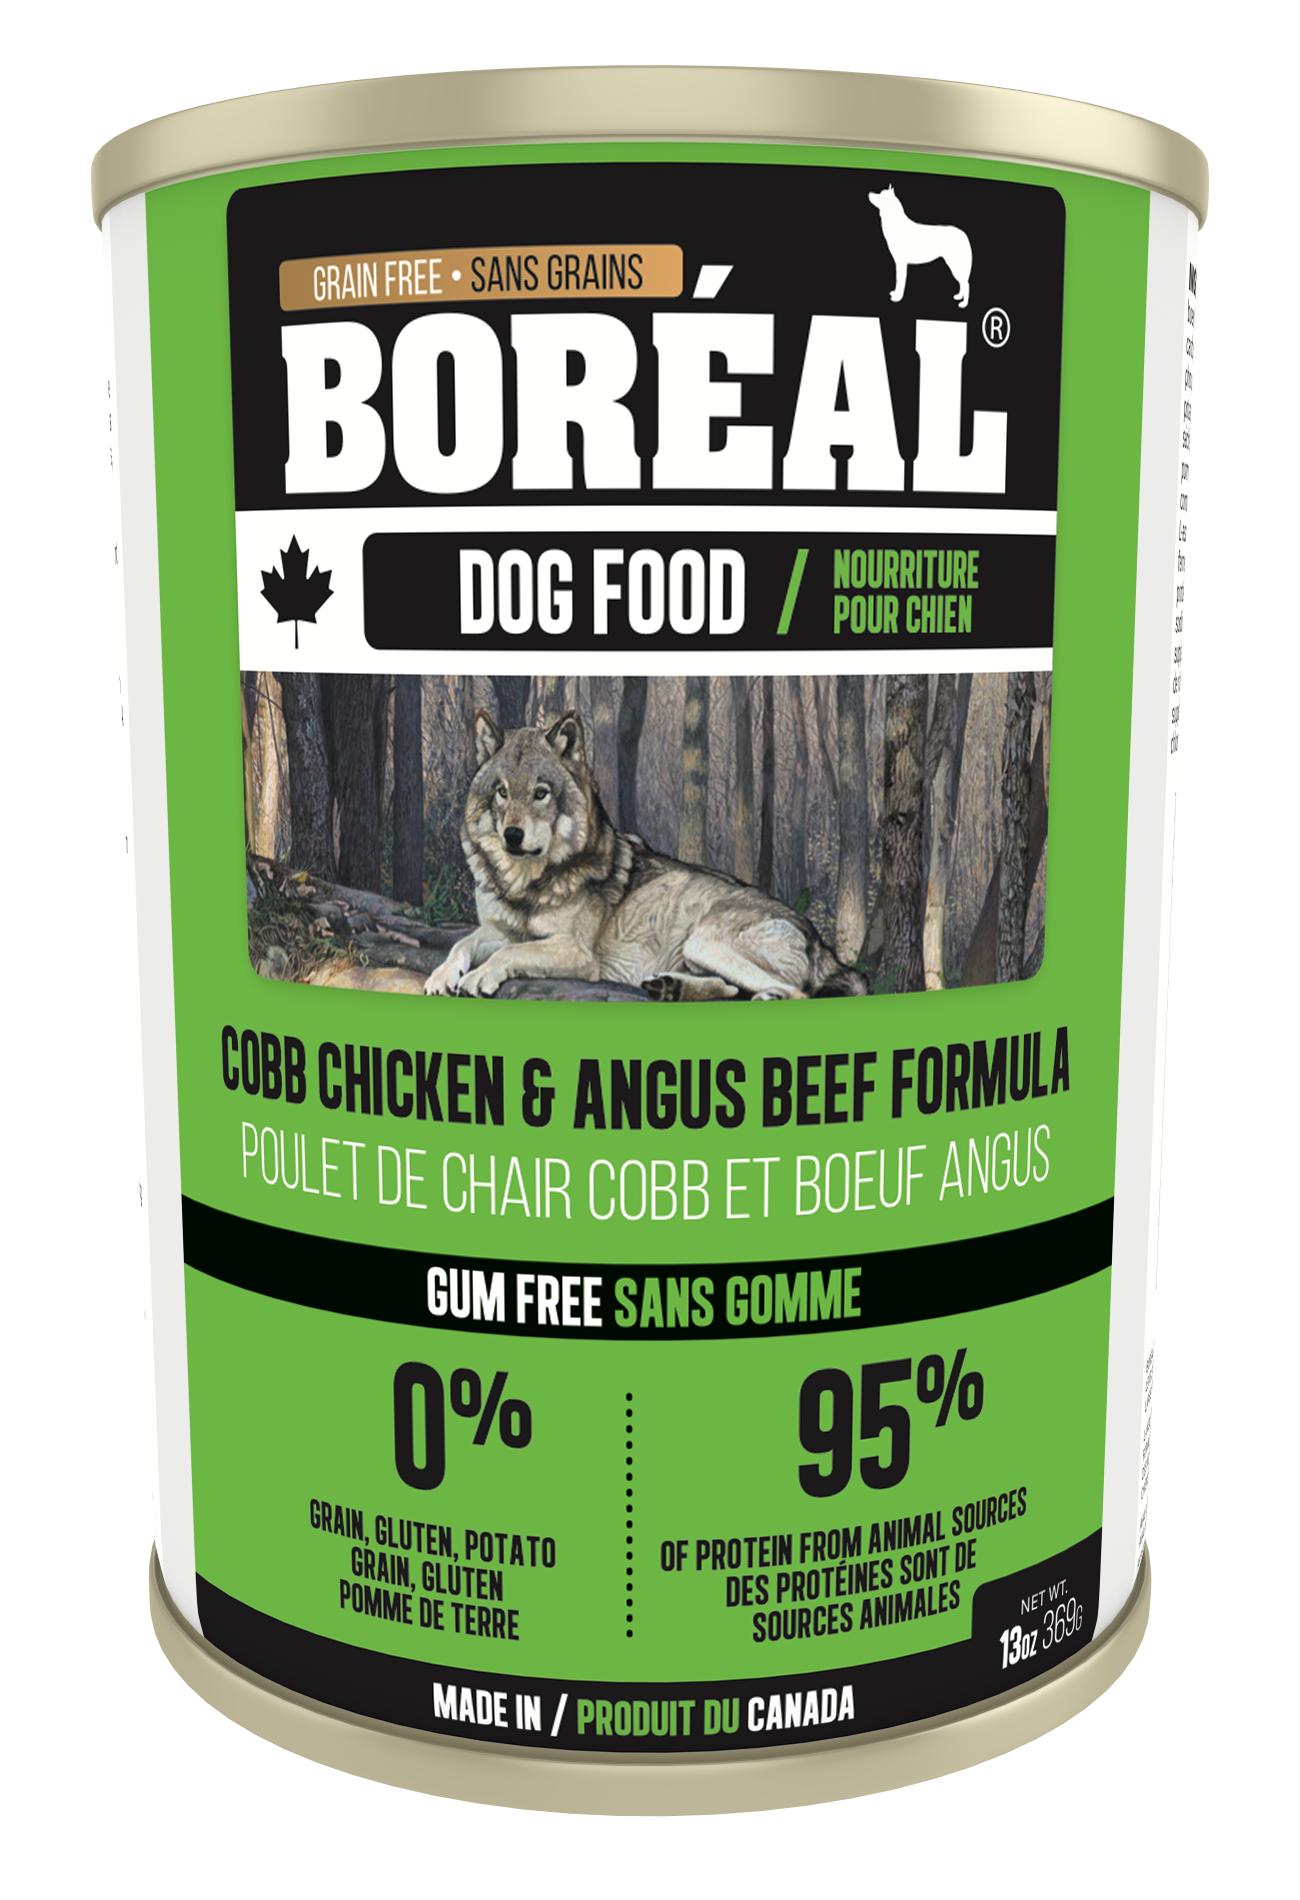 BORÉAL CANADIAN Angus Beef & COBB CHICKEN FORMULA for Dogs12 x 13.2 oz cans